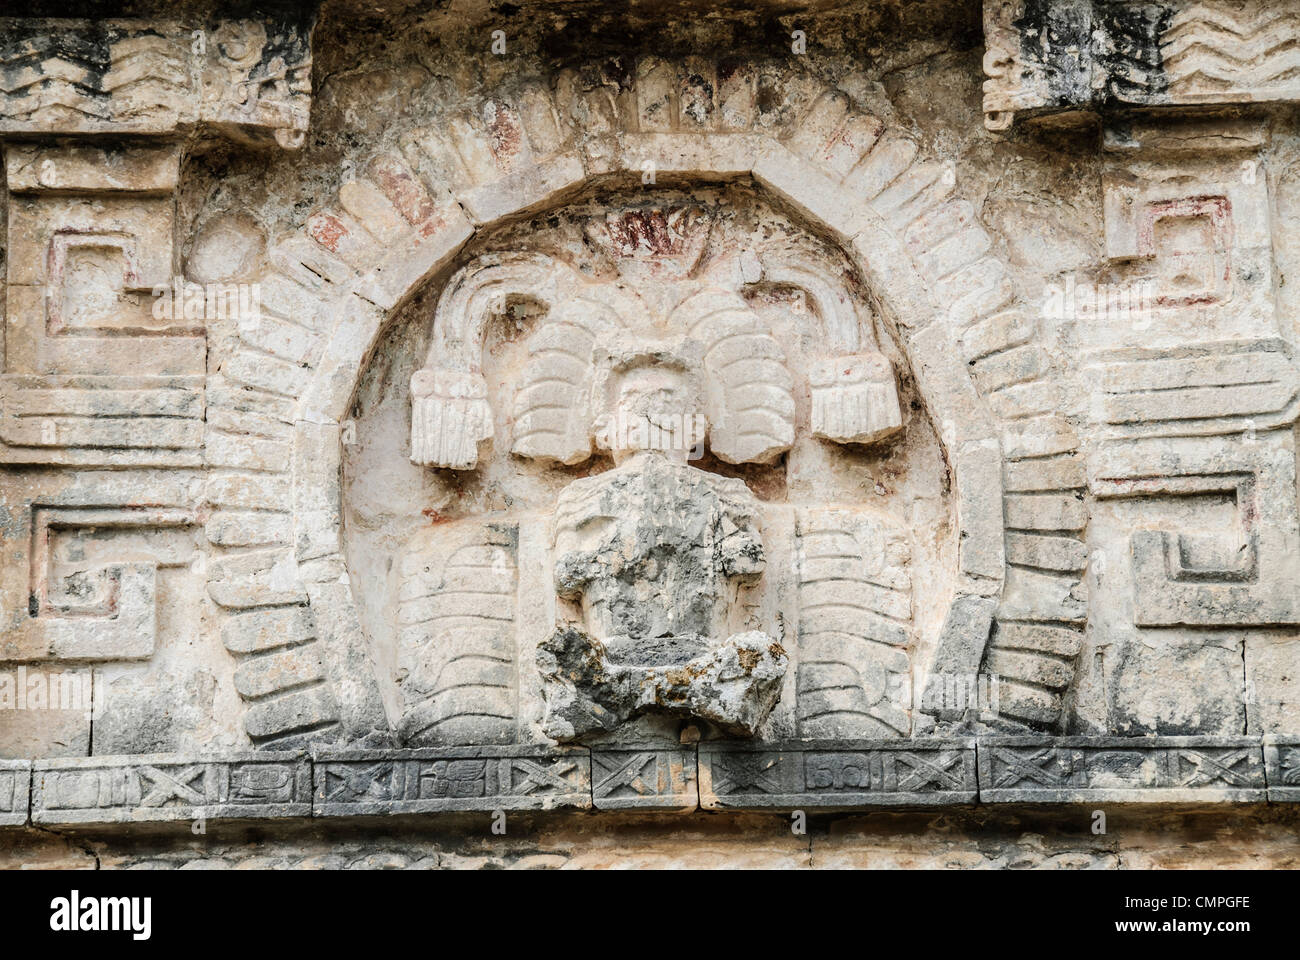 CHICHEN ITZA, Mexico - A carving of a Mayan king in the wall of one of the buildings at Chichen Itza Mayan Ruins in Mexico's Yucatan Peninsula Stock Photo